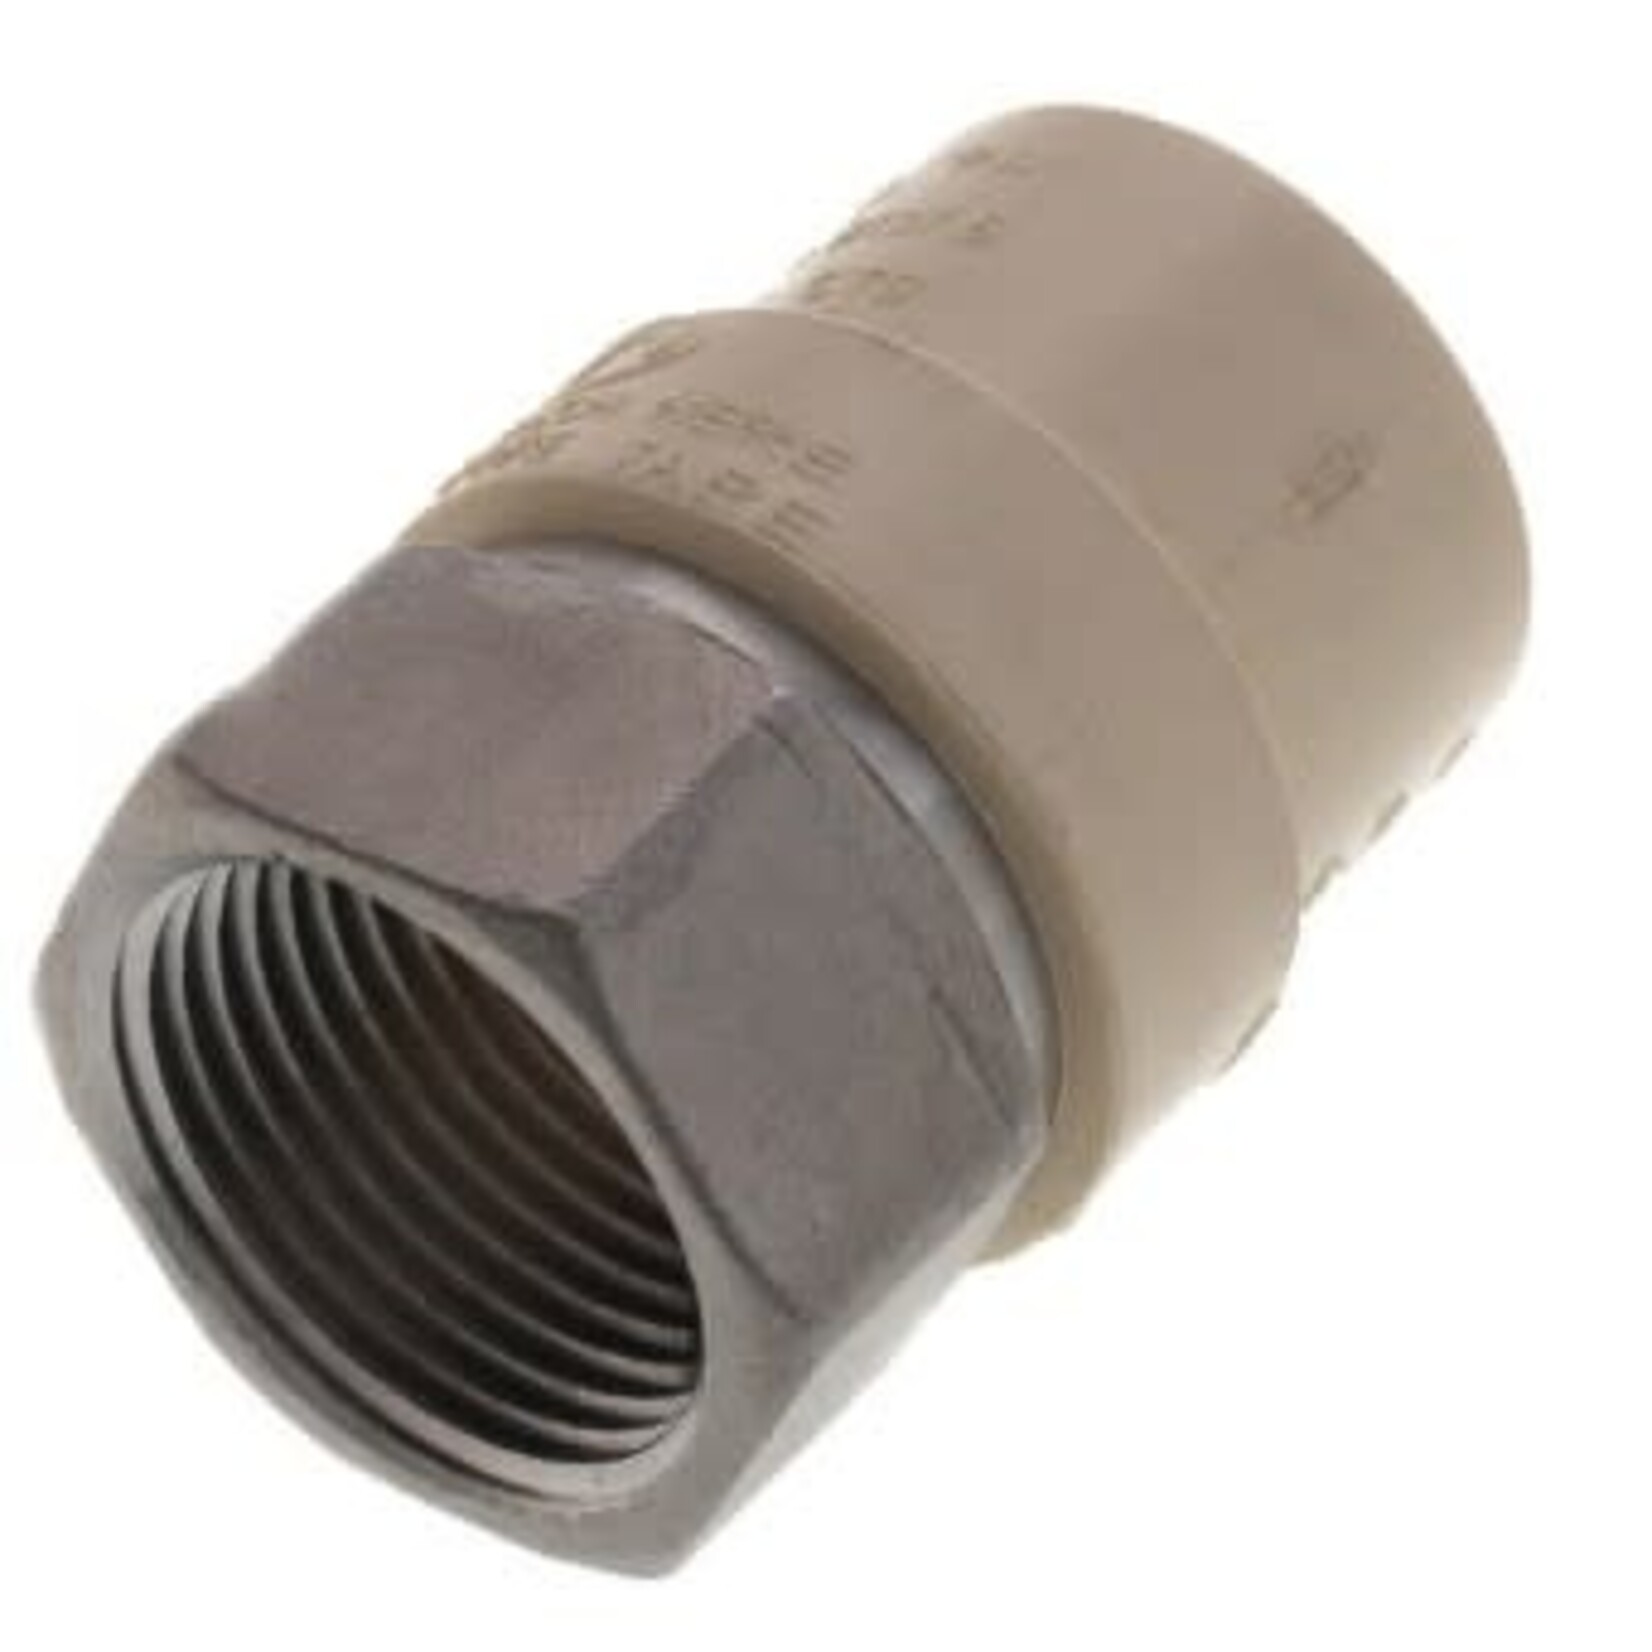 EVERFLOW 3/4 IN CPVC SCHEDULE 40 X STAINLESS STEEL FEMALE ADAPTER